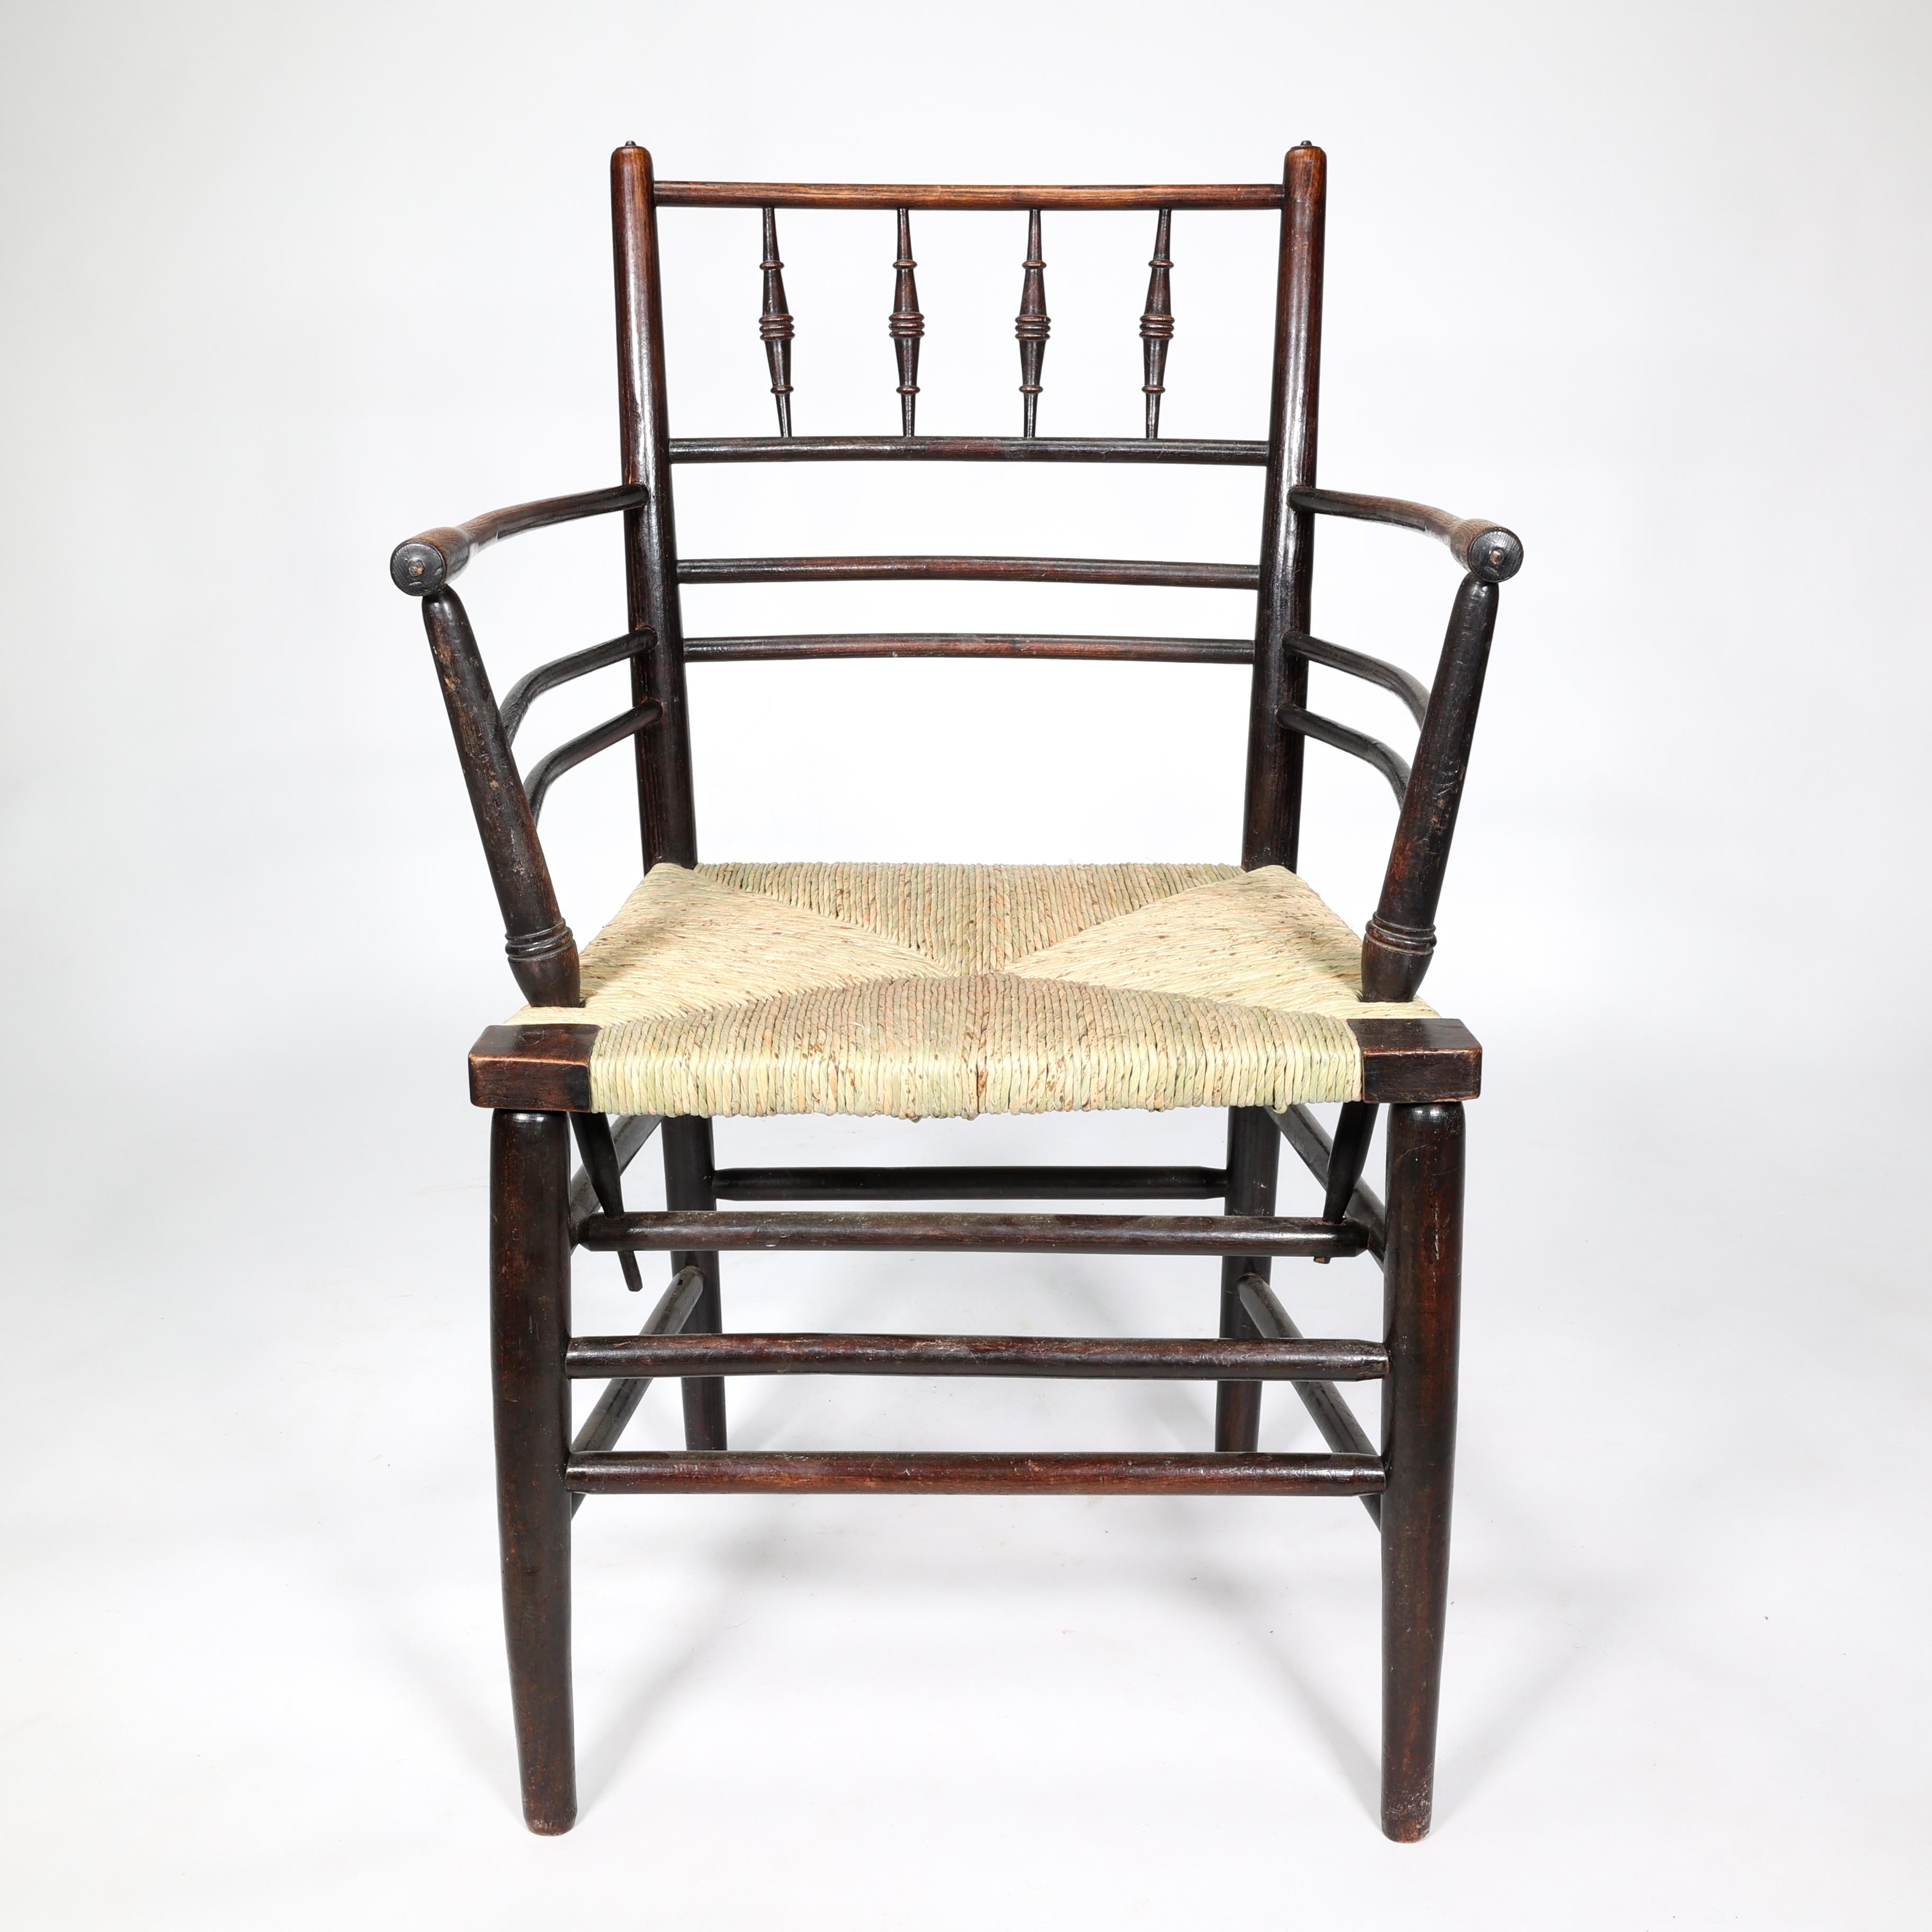 Arts and Crafts William Morris, A Classic Arts & Crafts Ebonised Armchair from the Sussex Range.